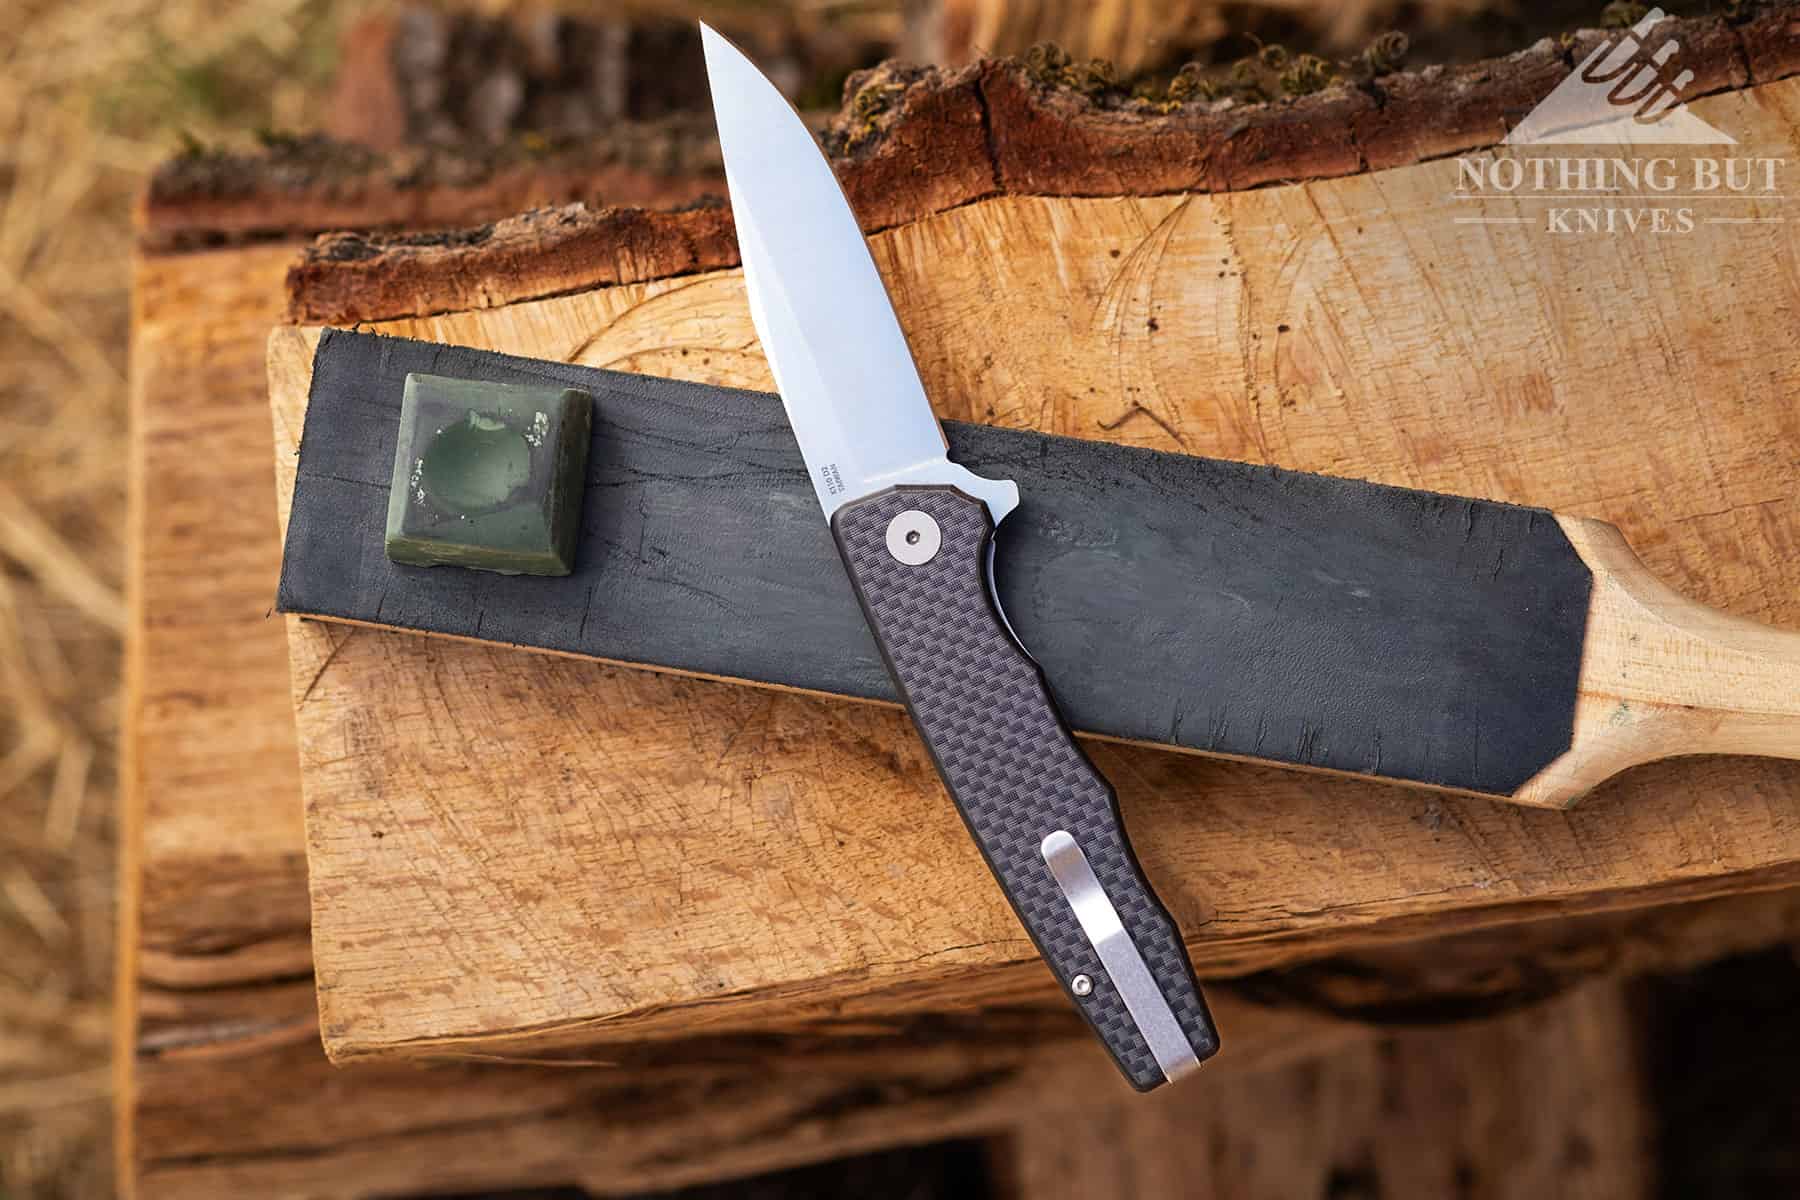 The Ocaso Strategy gentleman's carry EDC knife is a little tough to sharpen due to its steel type. 